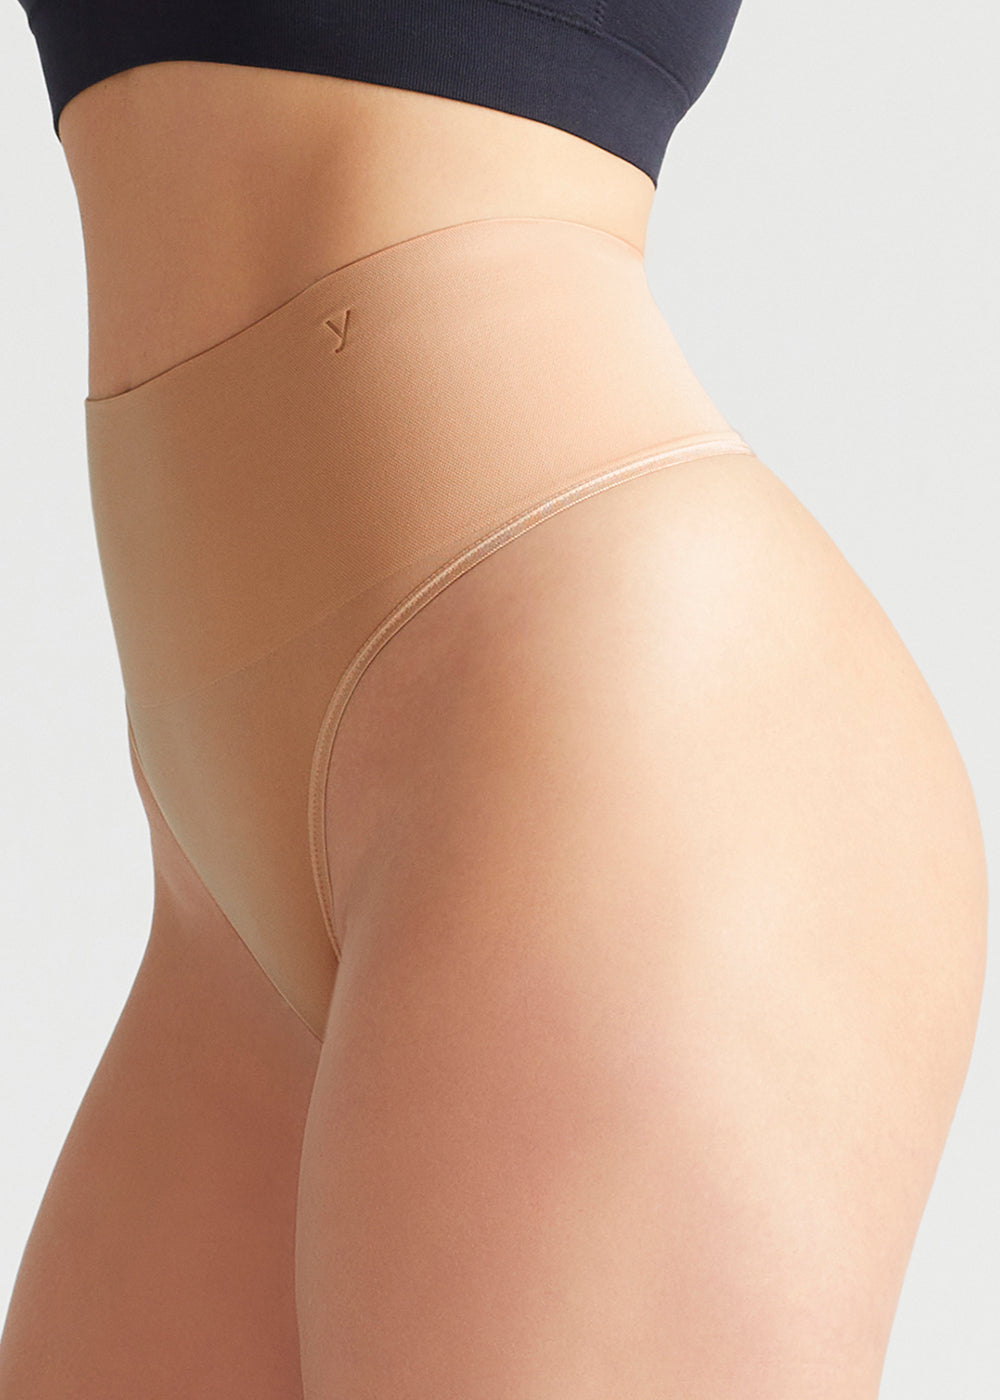 Yummie Seamless Lace Thong, Almond, Size M/L, from Soma